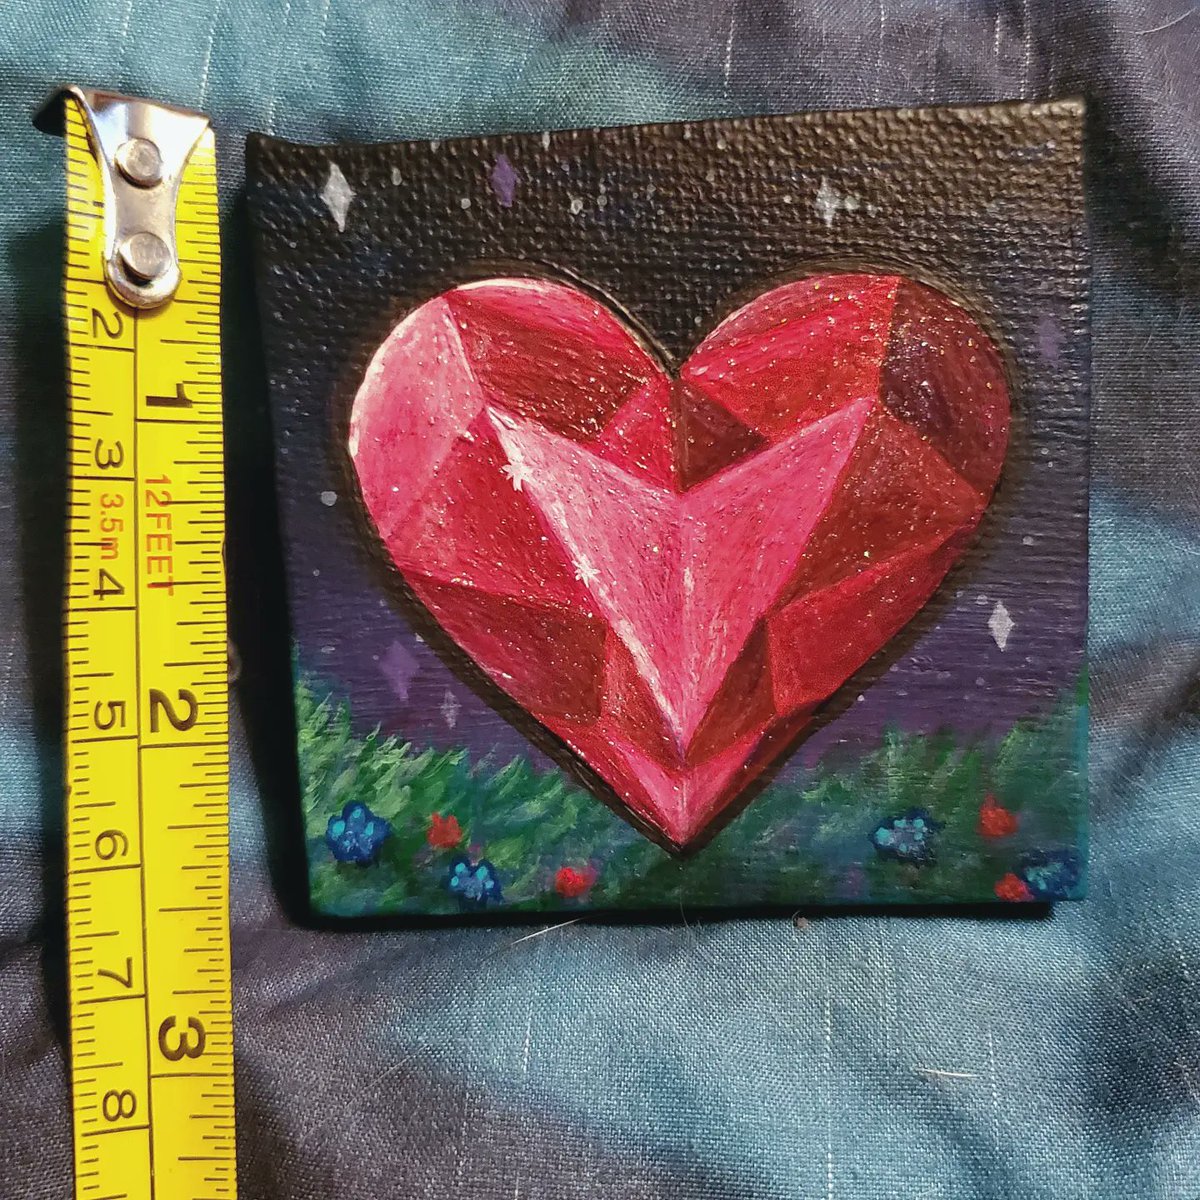 Did this one last night while binging Steven Universe for the 50th time. It felt weird to paint such a small canvas, but I'm happy with how it came out 🥰❤
#art #ArtistOnTwitter #painting #fanart #StevenUniverse #stevenuniversefanart #tinypainting #spinel #artwork #artist